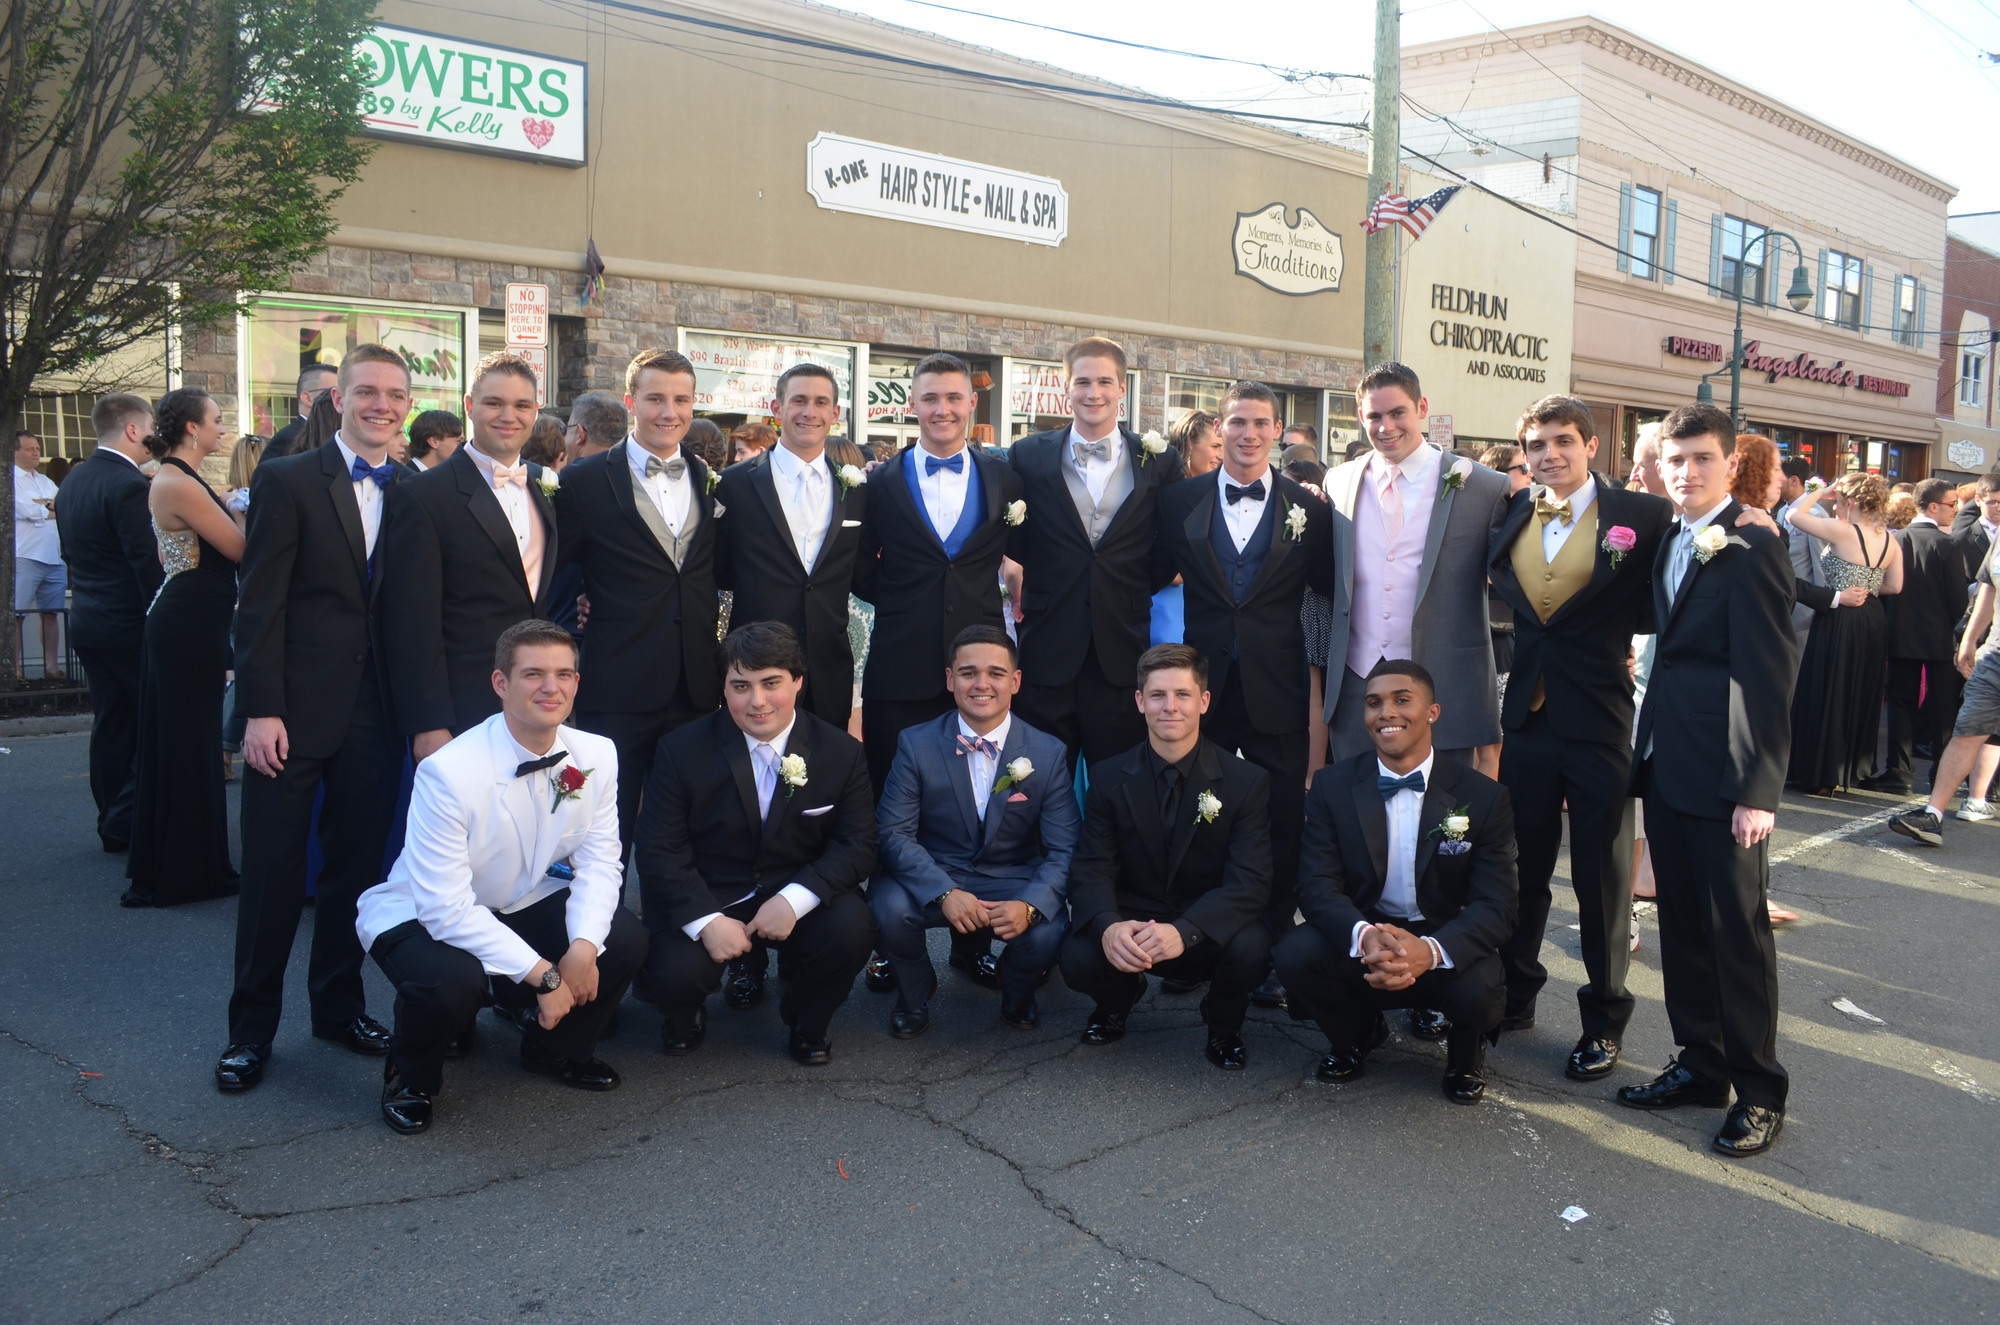 Some of the gentlemen going to the prom.